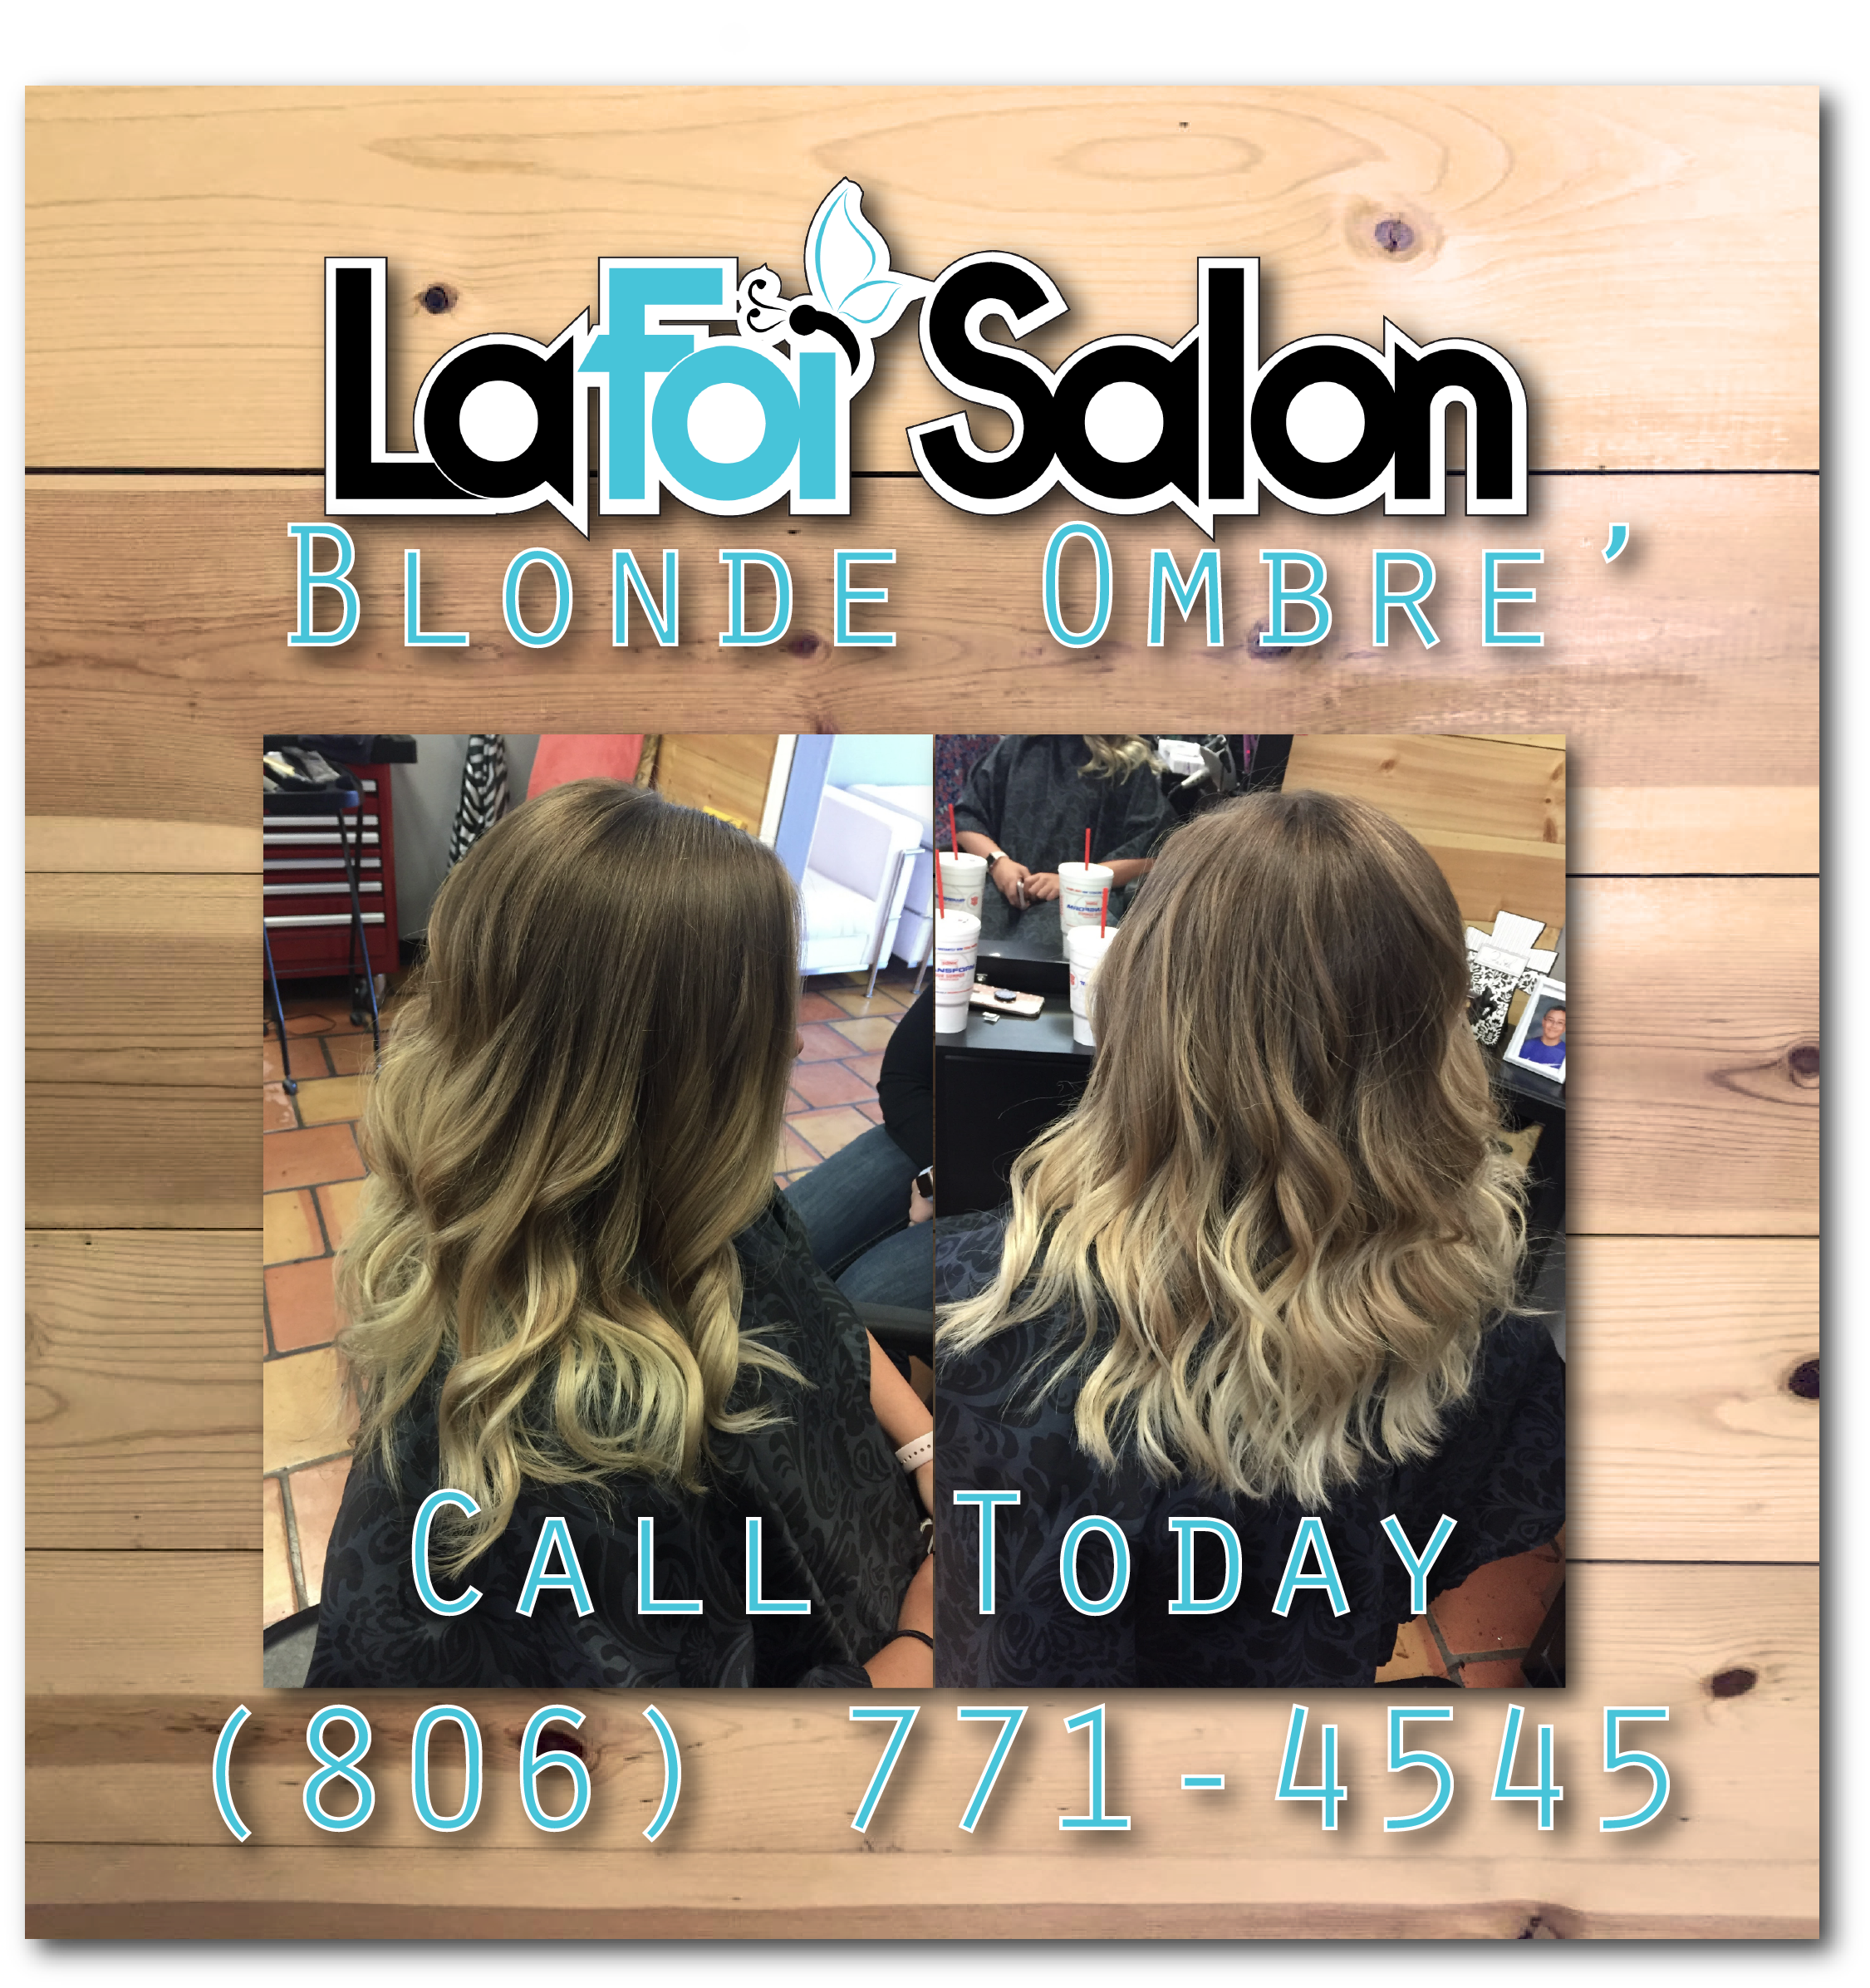 Ombre& 39; By LeeAnn Floyd: Invest In Your Hair!! You Wear It Everyday!! (806) 771-4545 www.lafoisalon.com